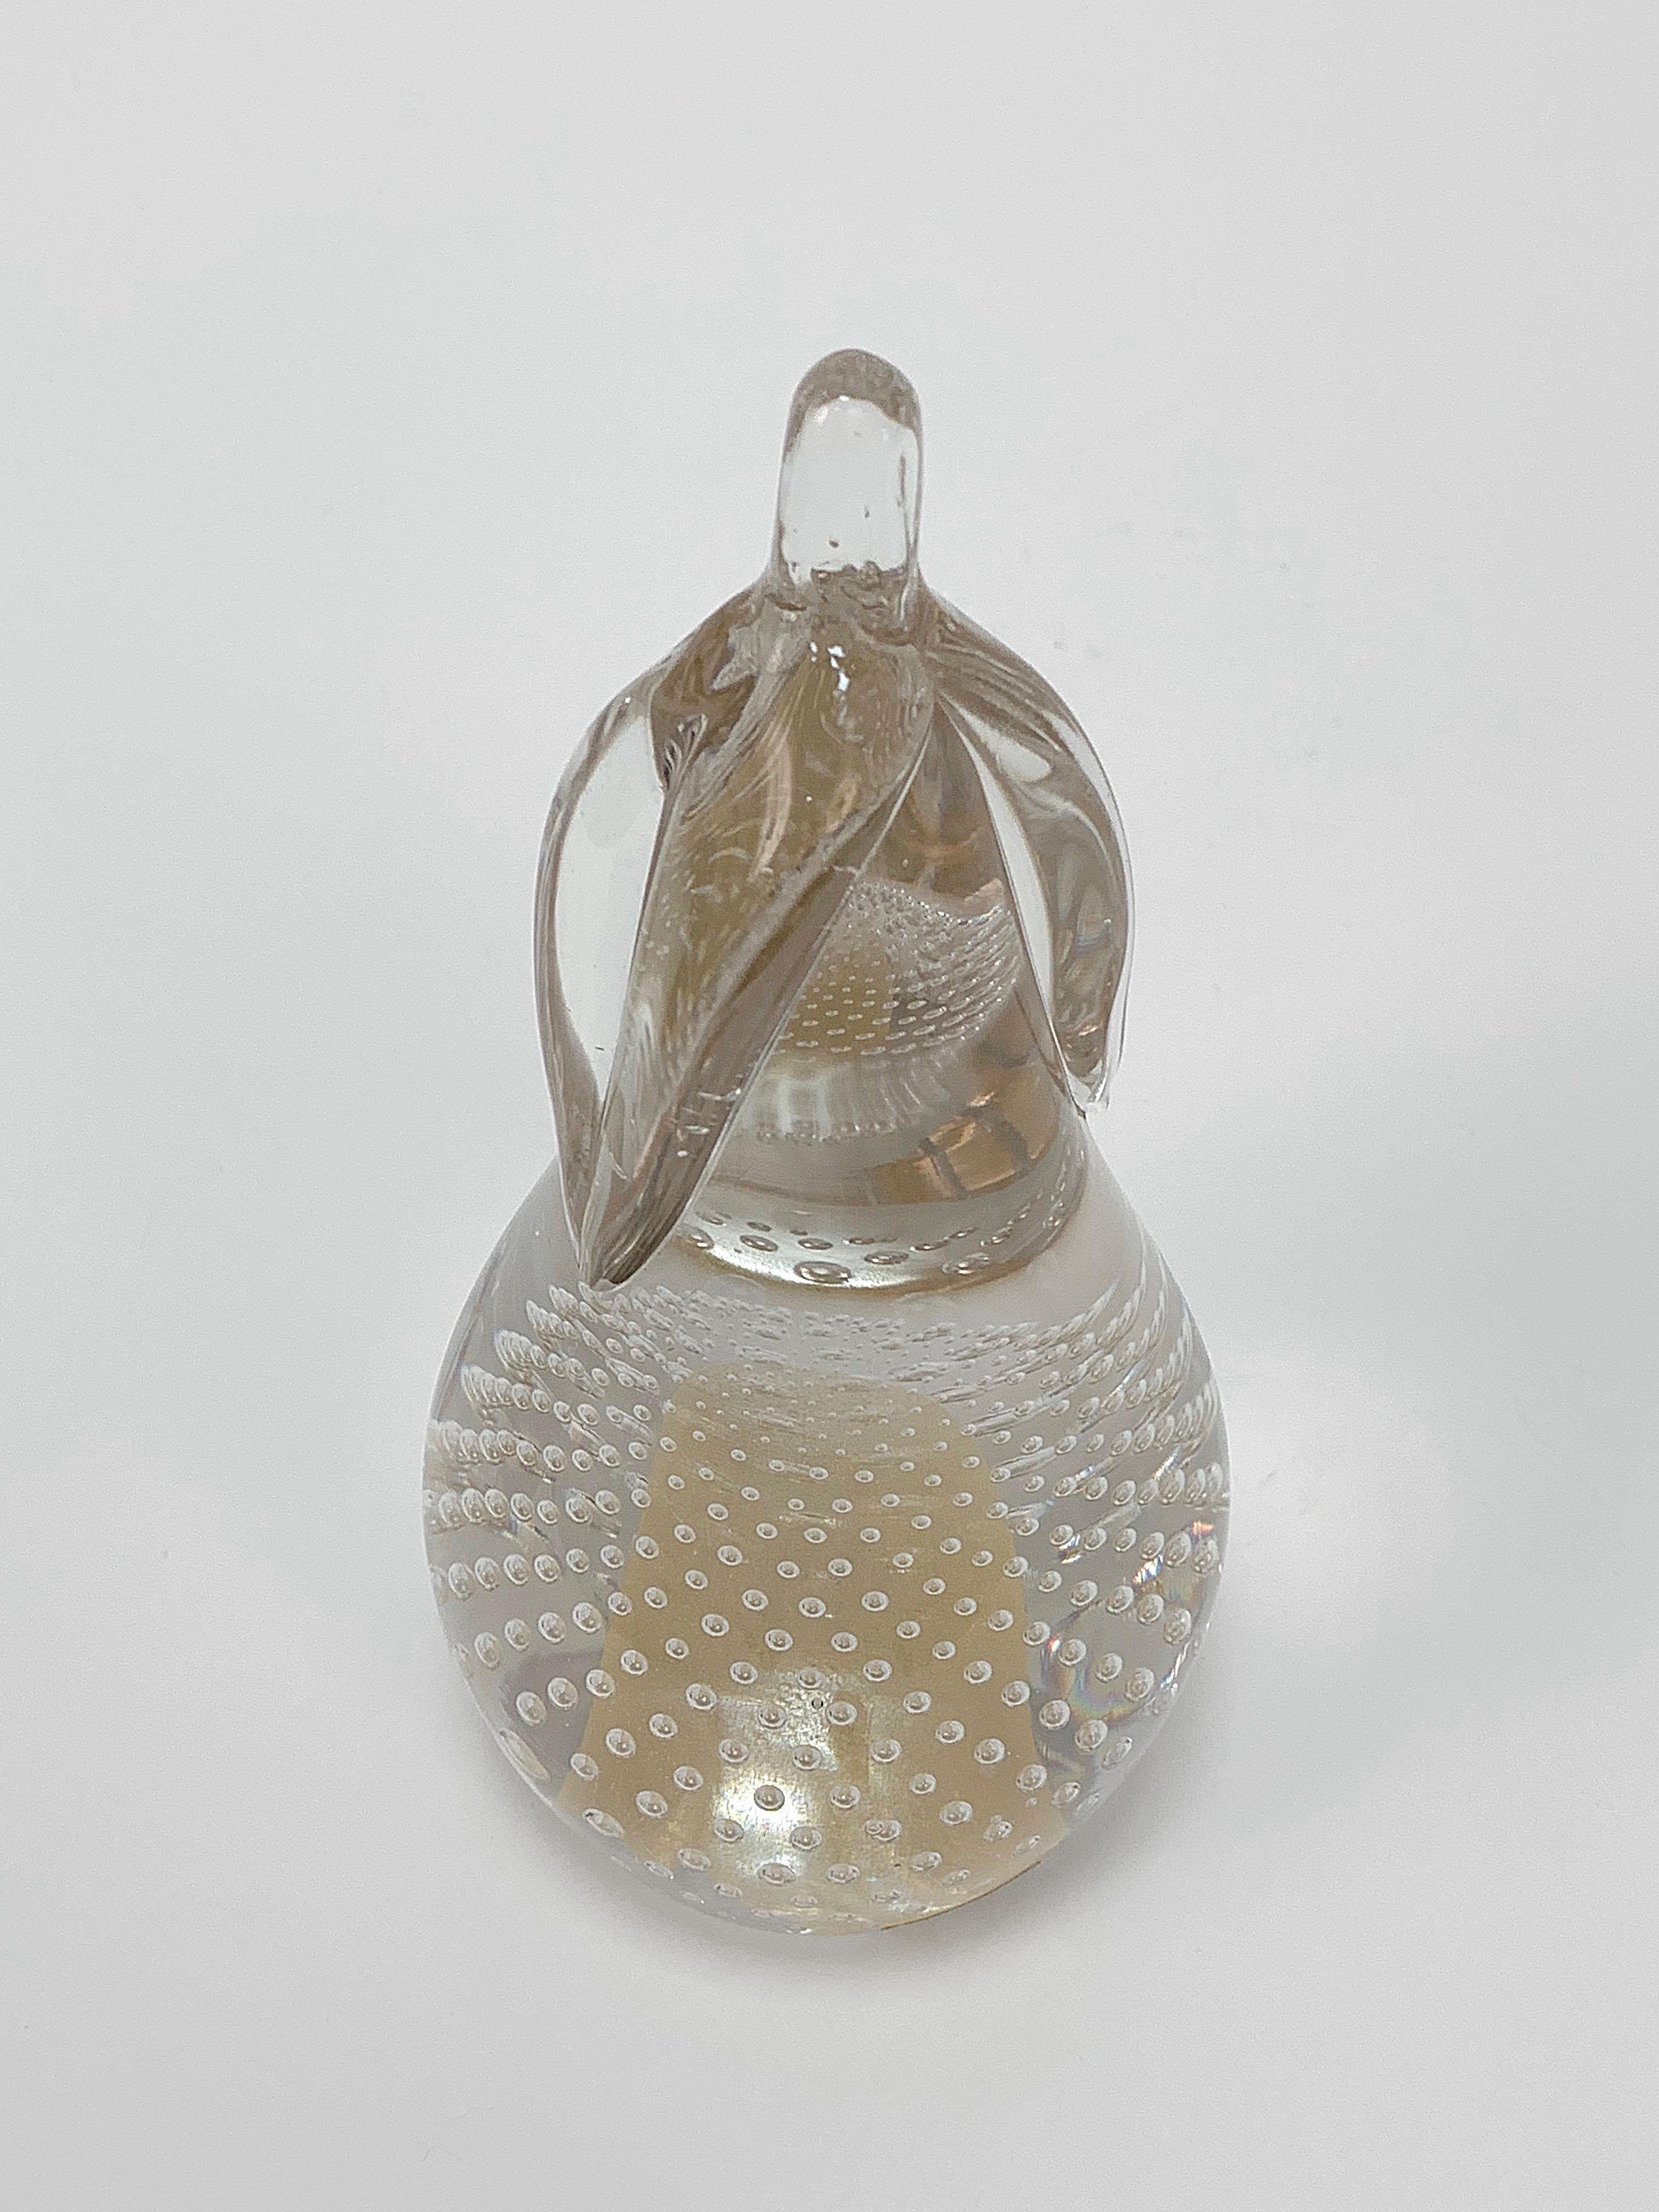 Clear handblown Murano glass with 24-karat gold stains. Checked air bubbles
Gorgeous decorative piece with a solid weight and beautiful clarity.
Signed Vetrarti.